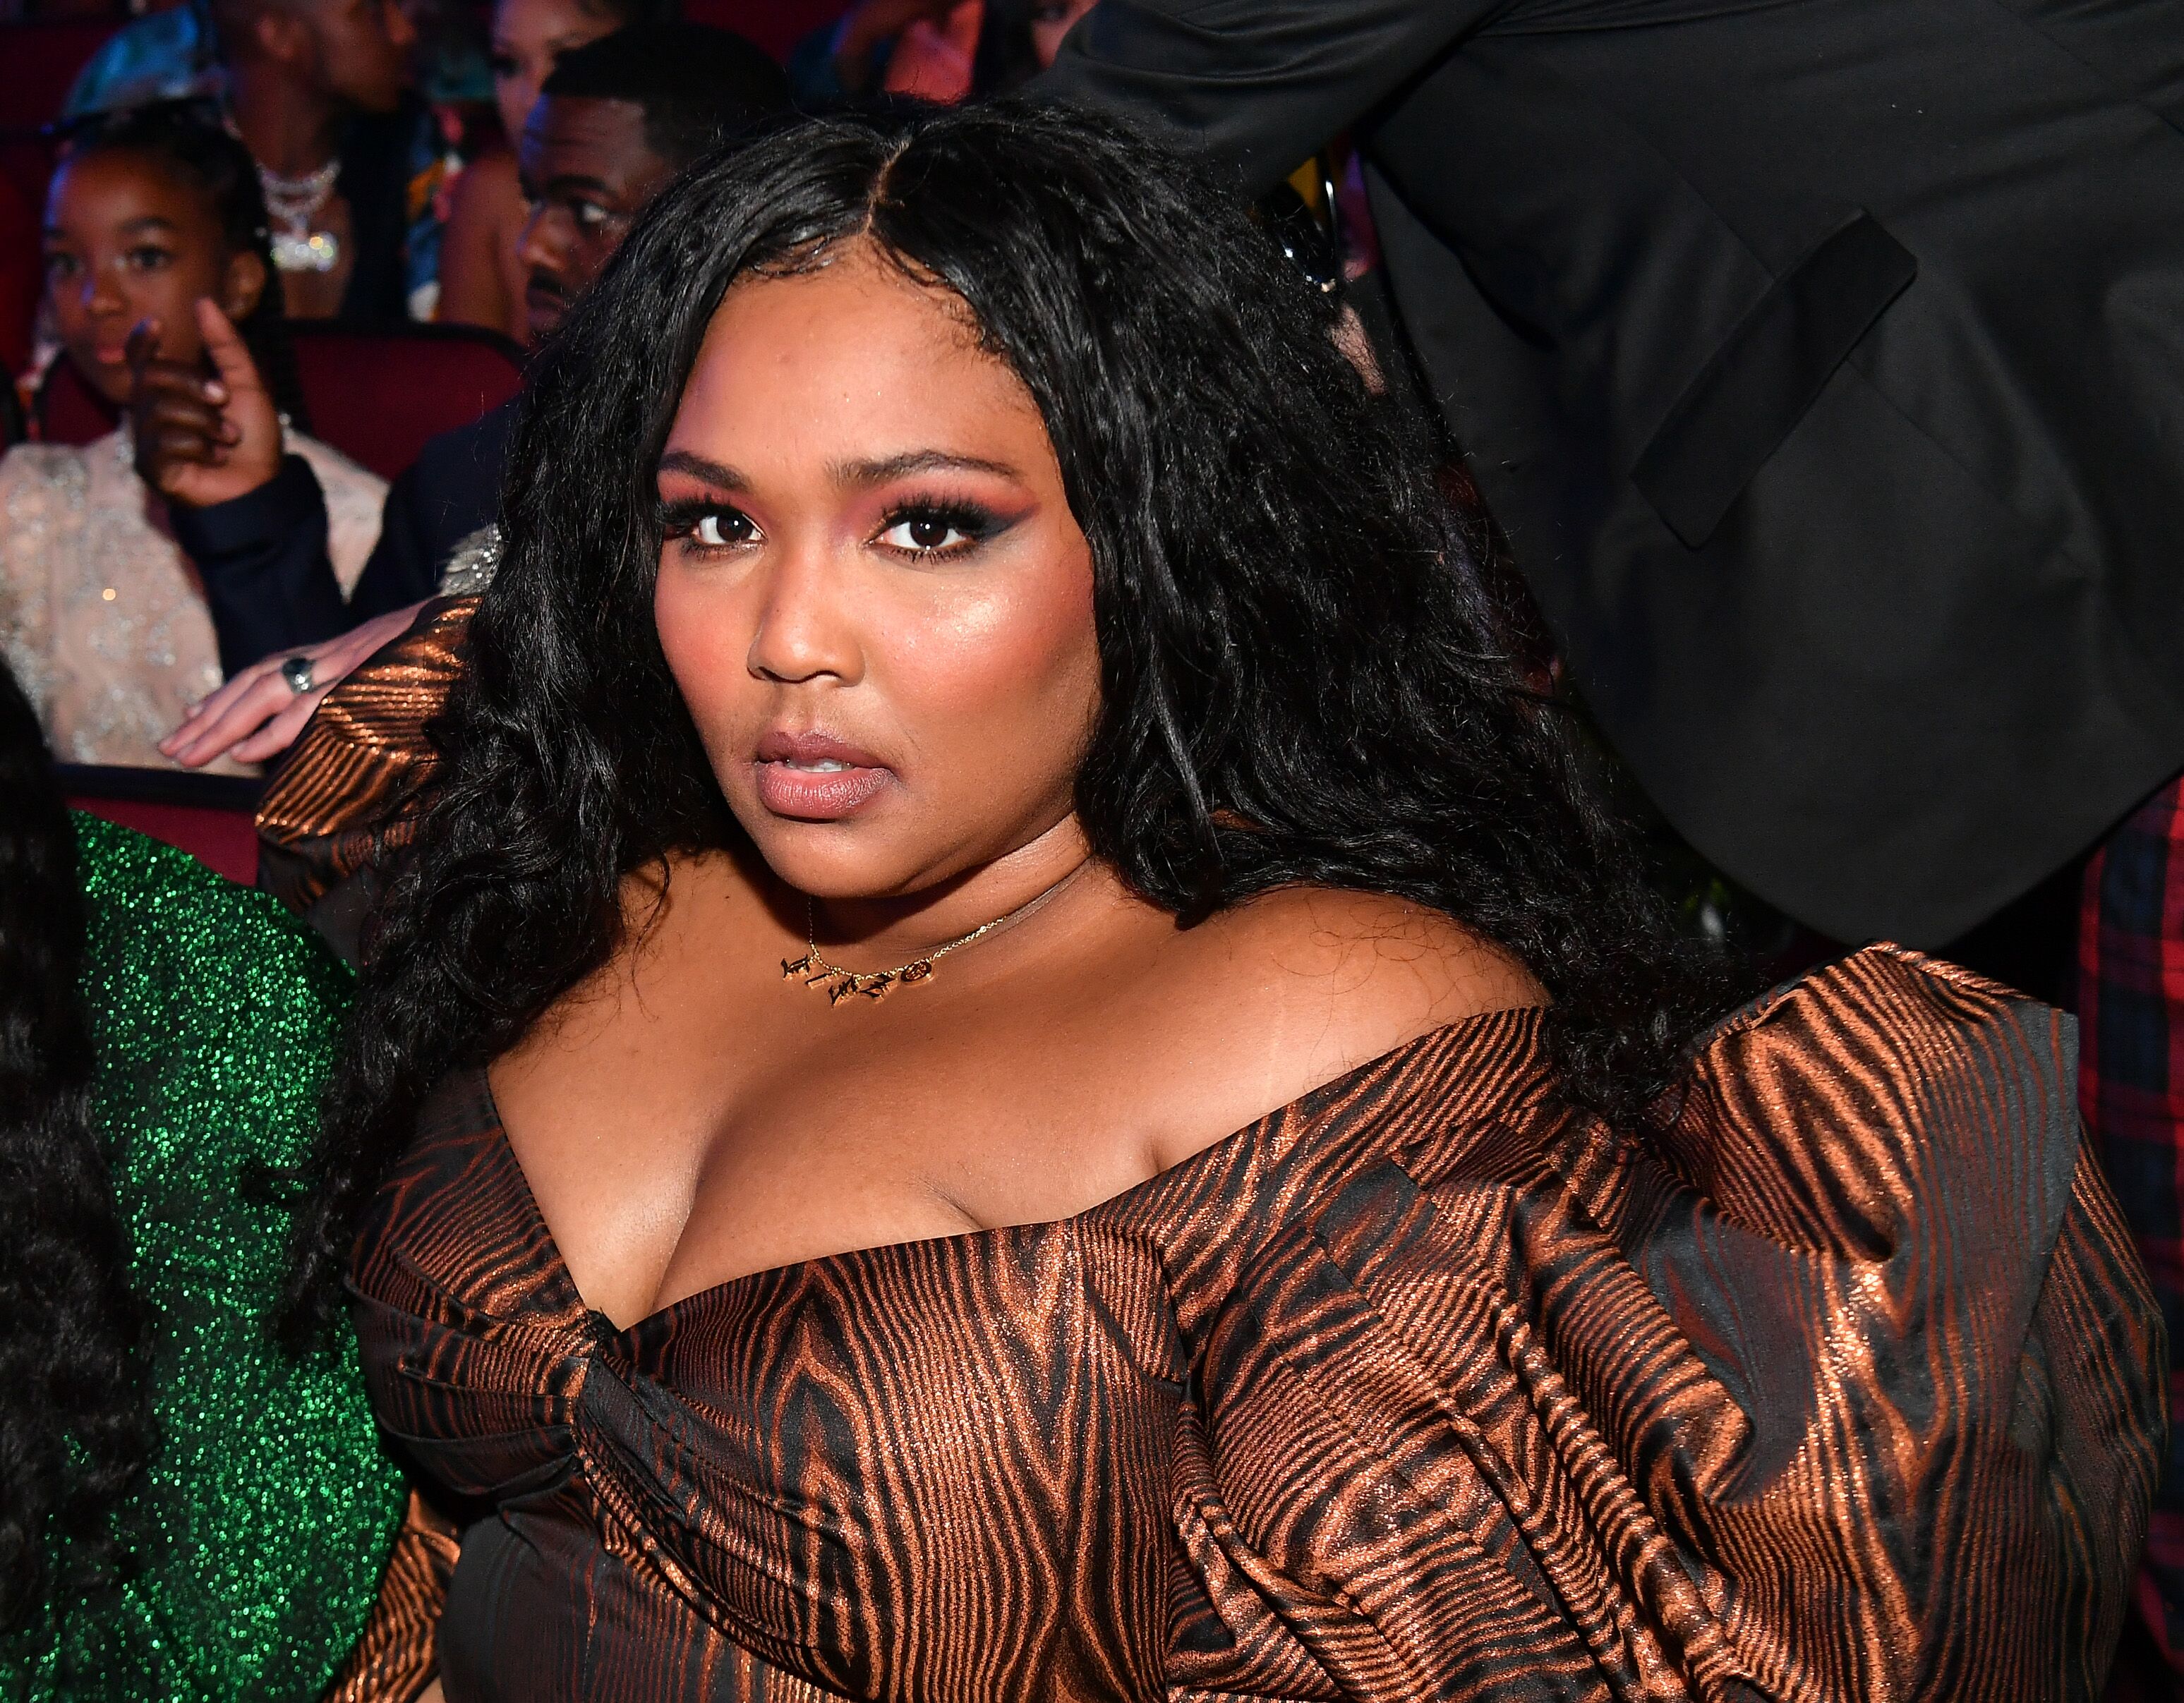 Lizzo at the BET Awards/ Source: Getty Images